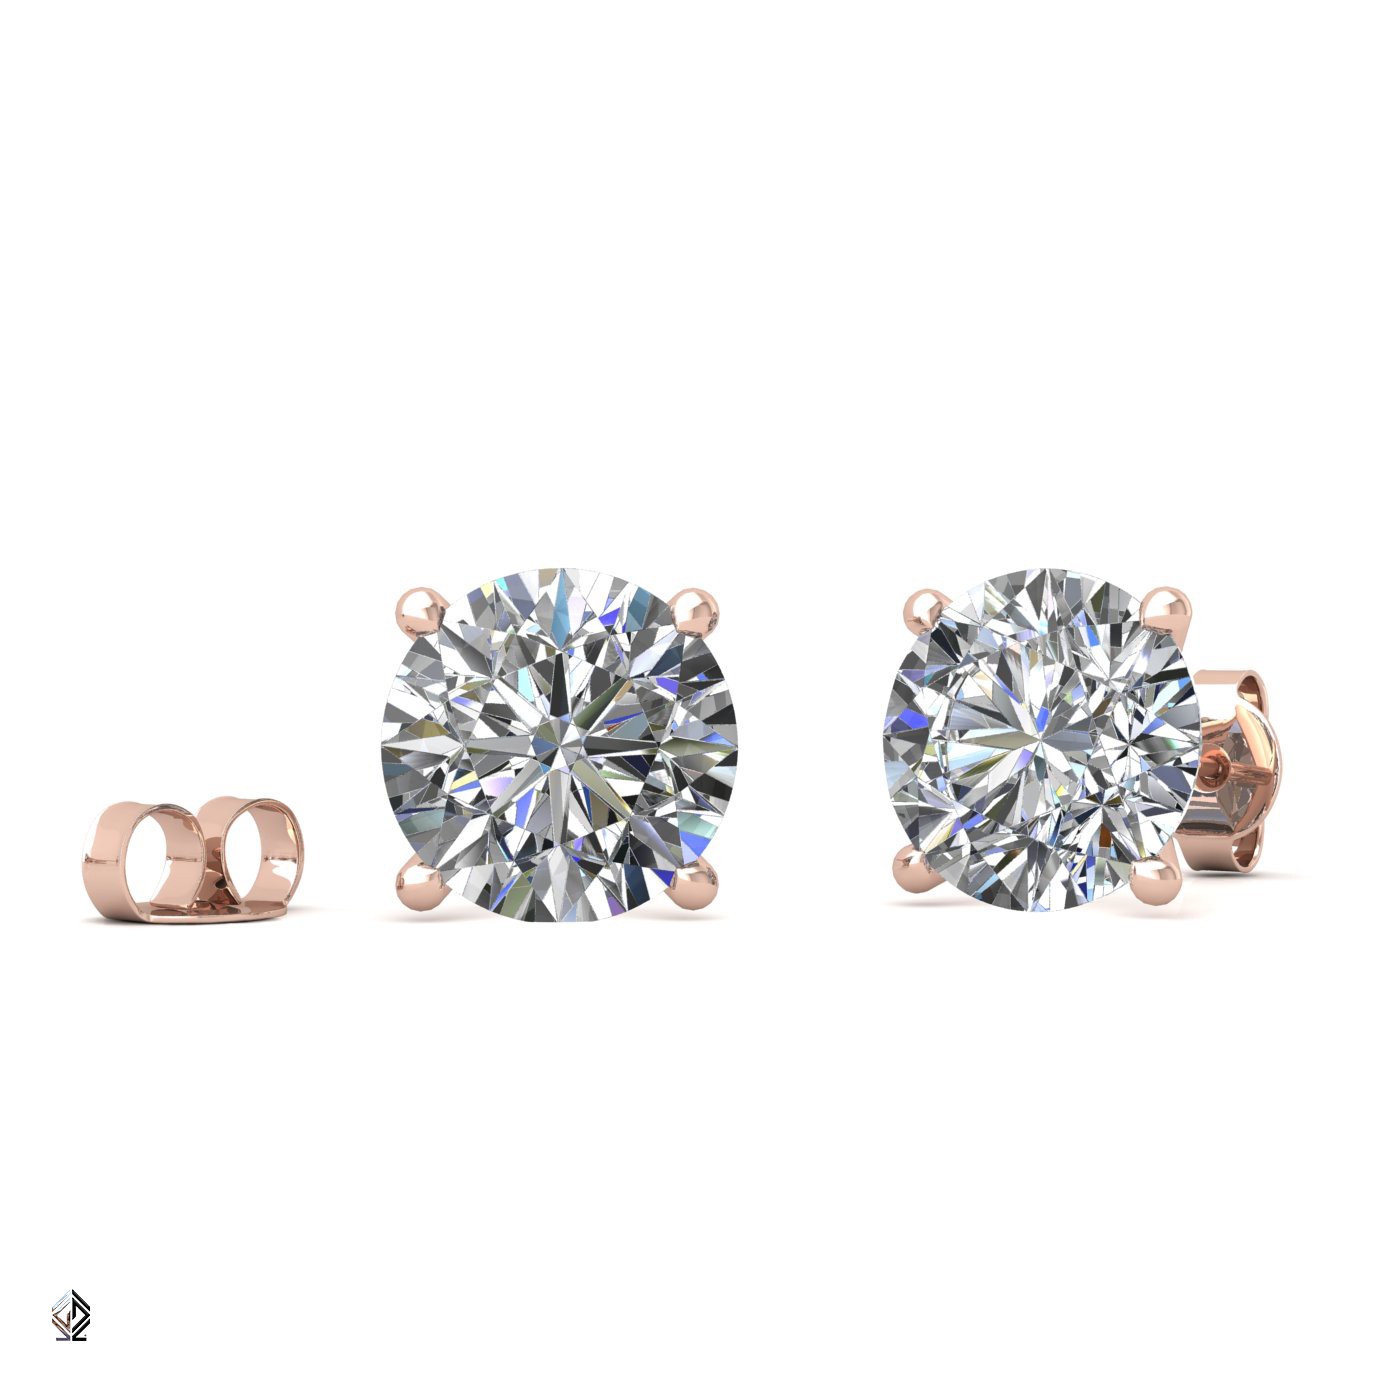 18k rose gold 1.5 ct 4 prongs round cut classic diamond earring studs Photos & images